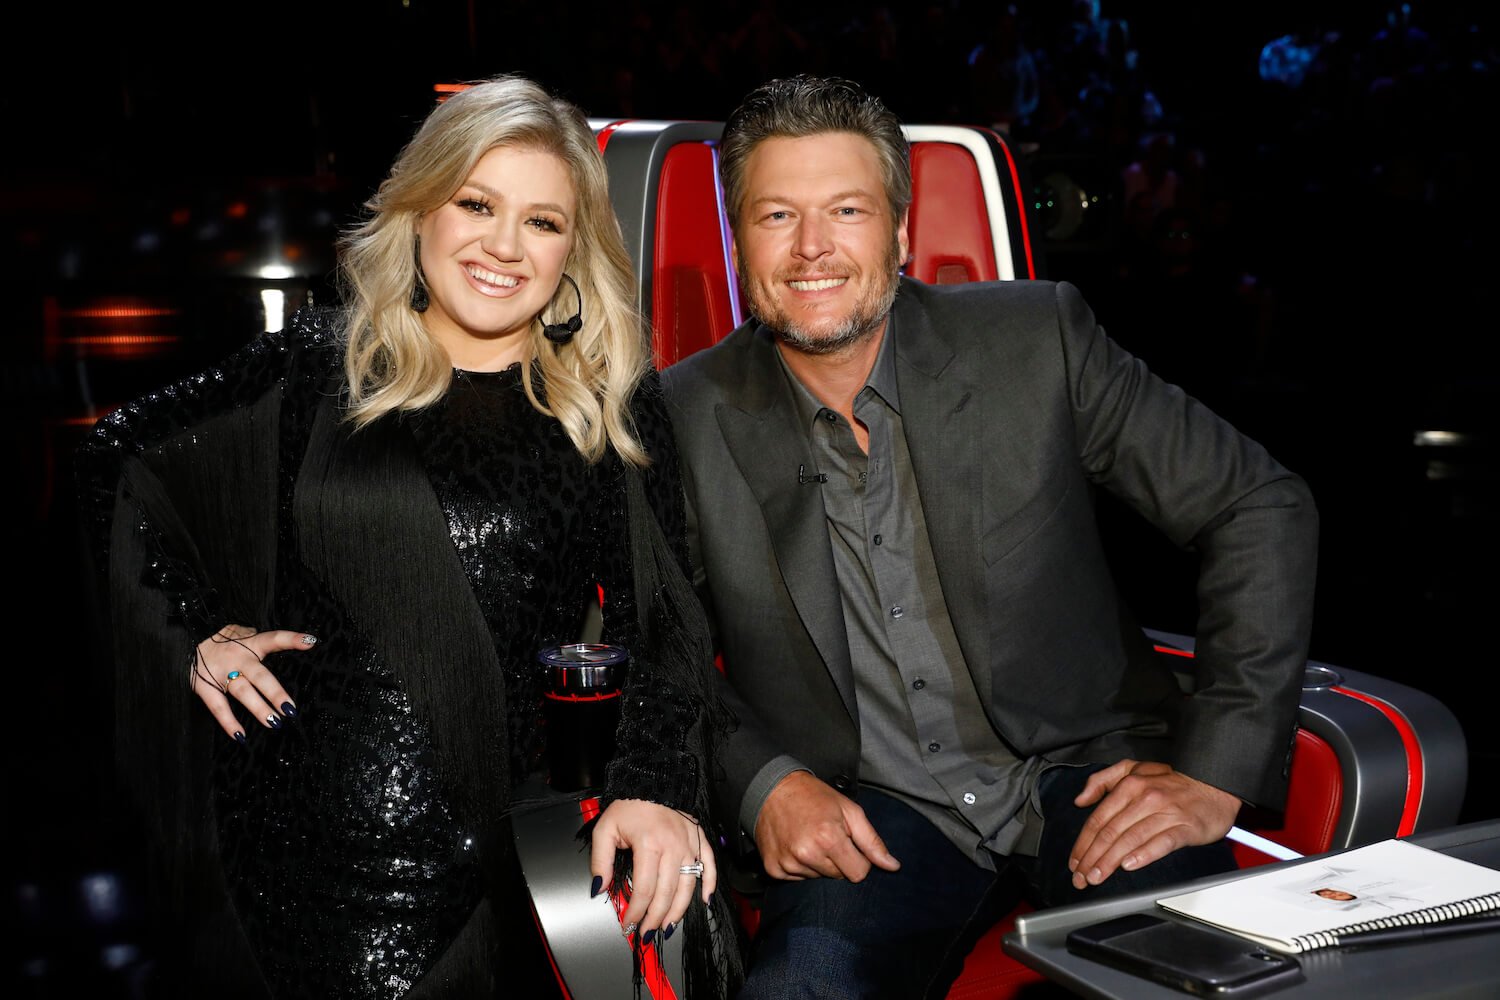 Kelly Clarkson and Blake Shelton smiling and posing for 'The Voice'